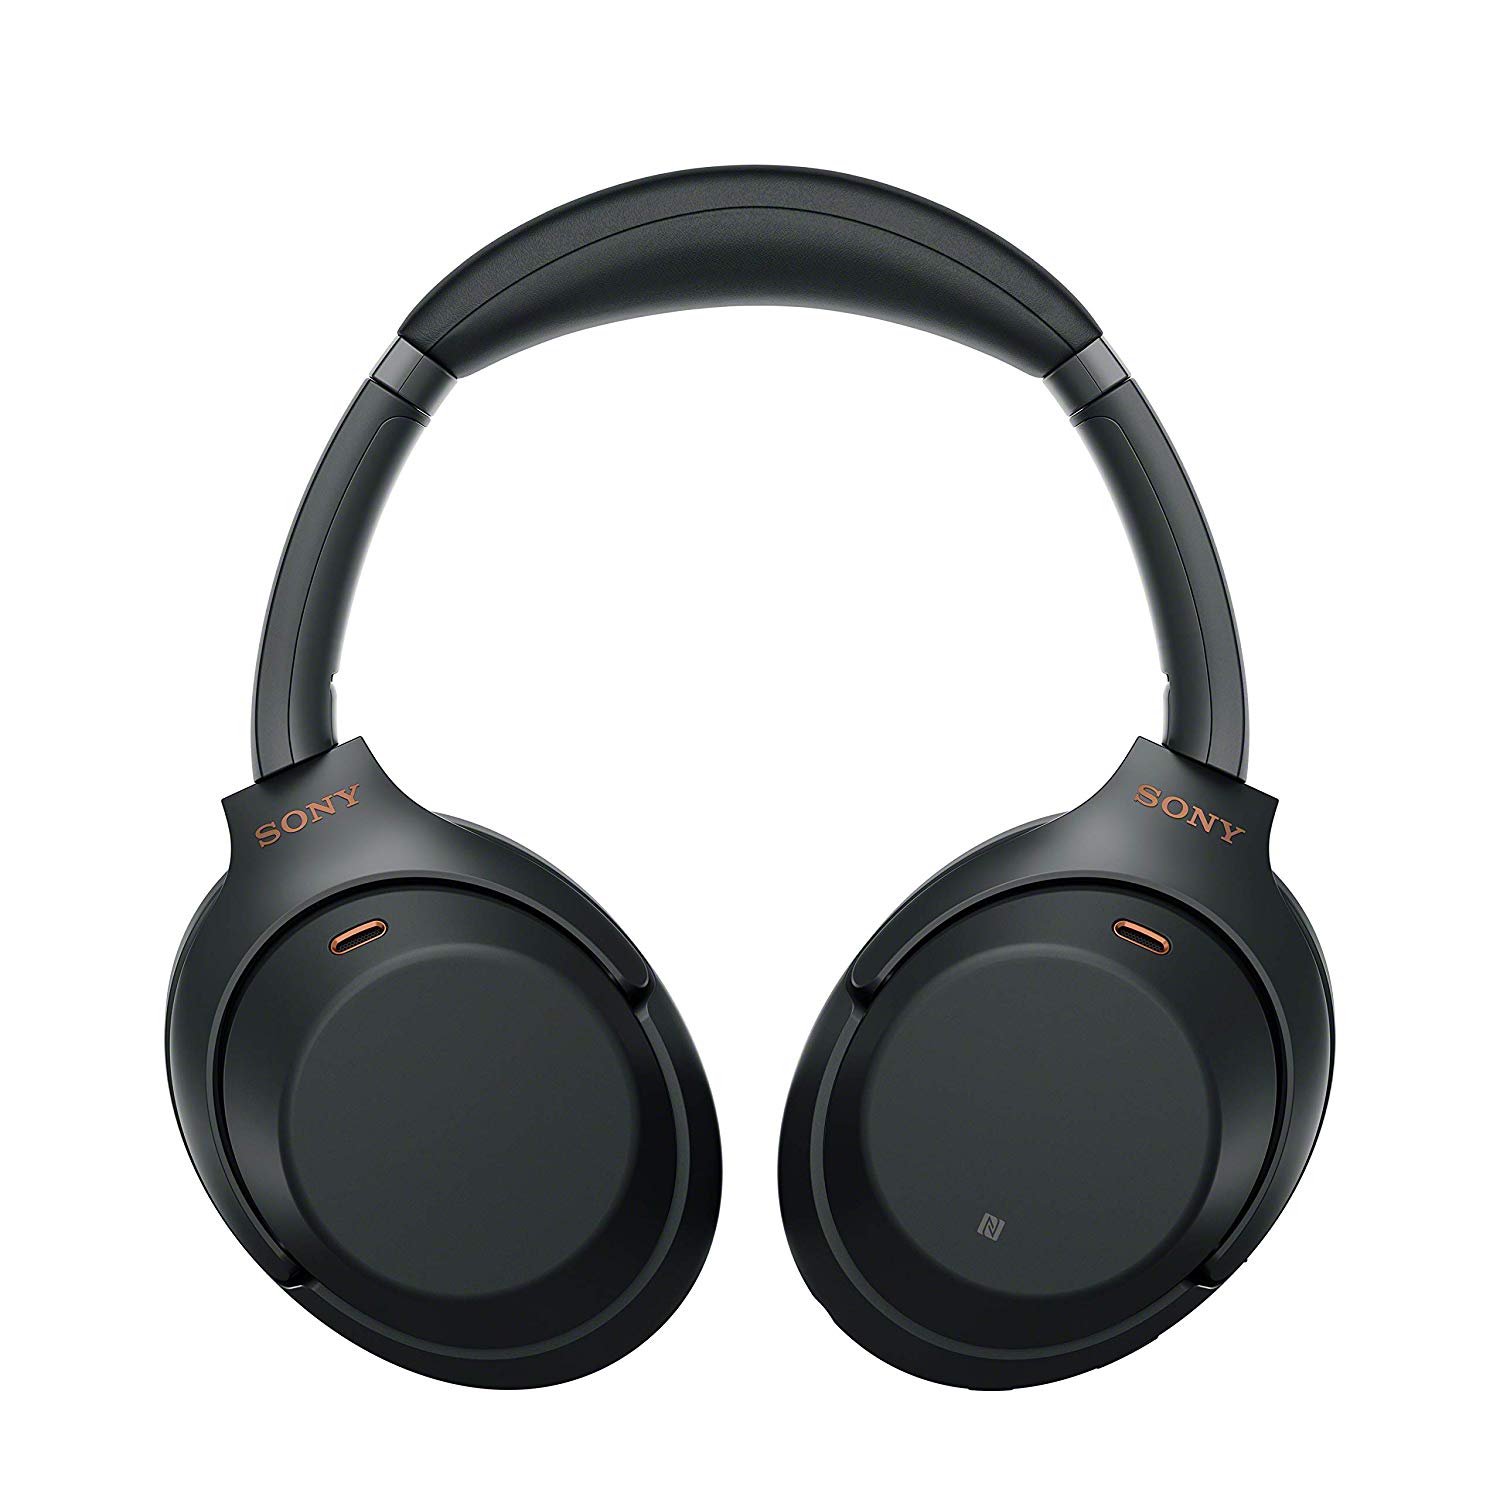 Sony WH-1000x M3 Noise Cancelling Headphone Review